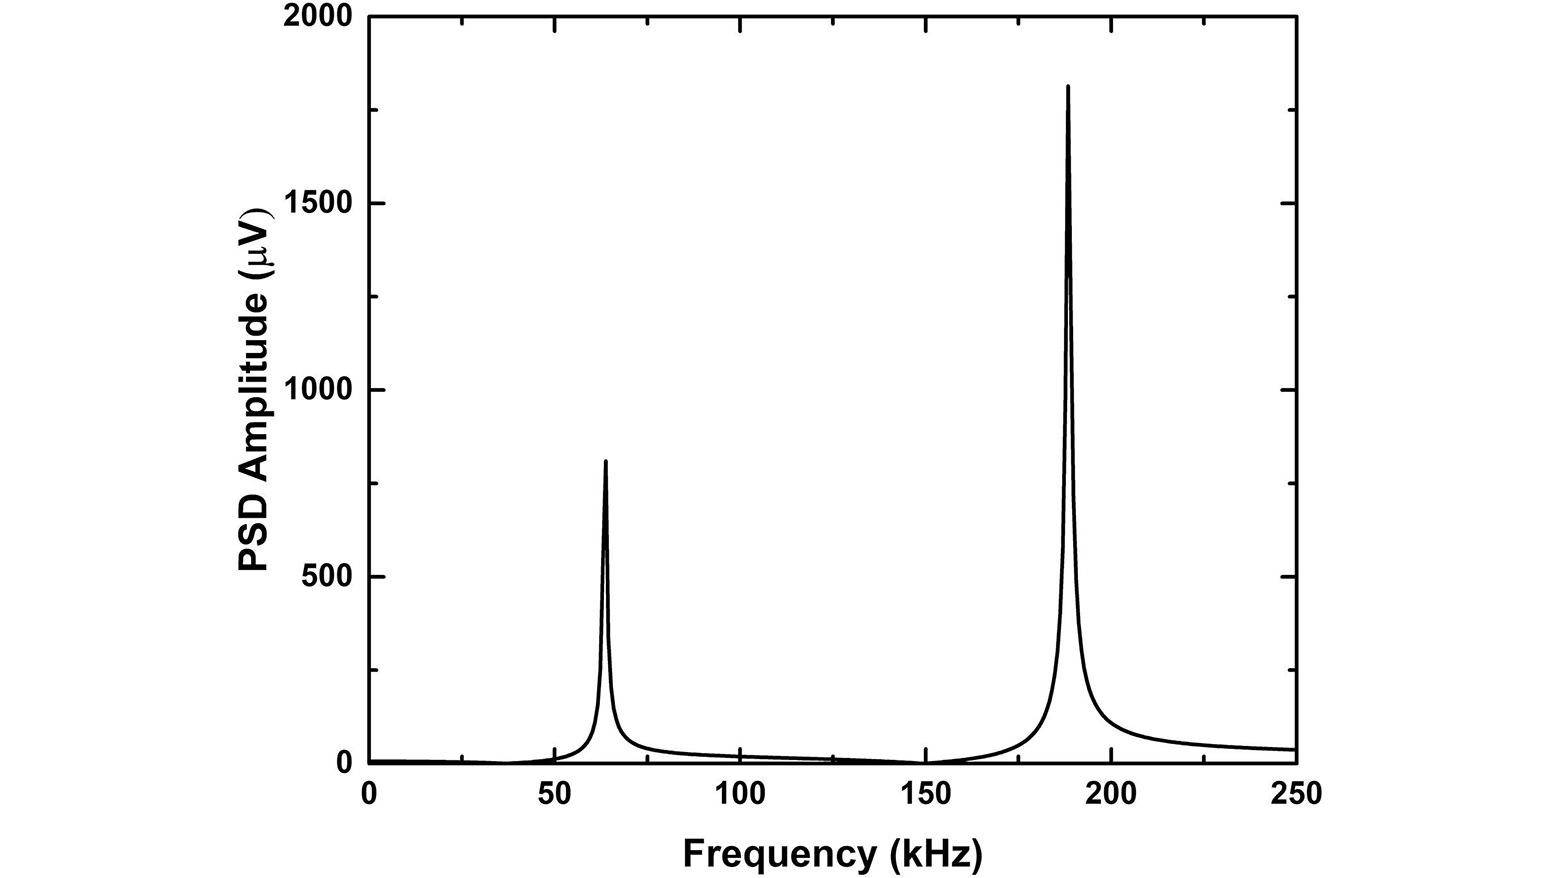 Calculated power spectral density (PSD) of the cantilever deflection response